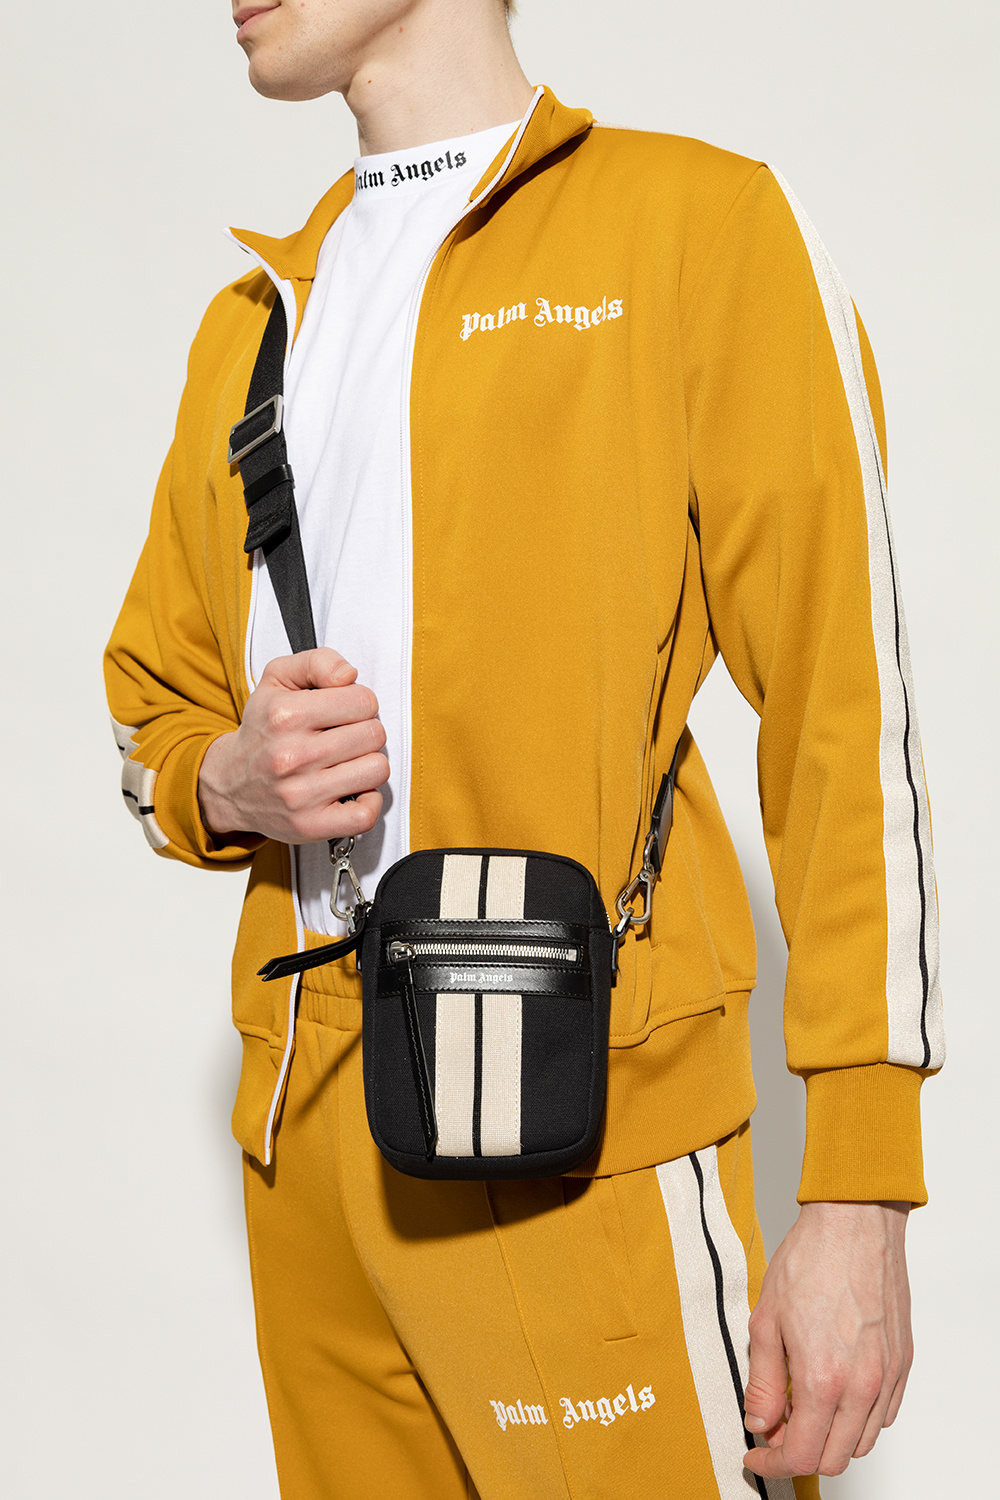 Palm Angels Demna Gvasalia taps the trend for micro accessories with the white Hourglass Mini tote bag shape from